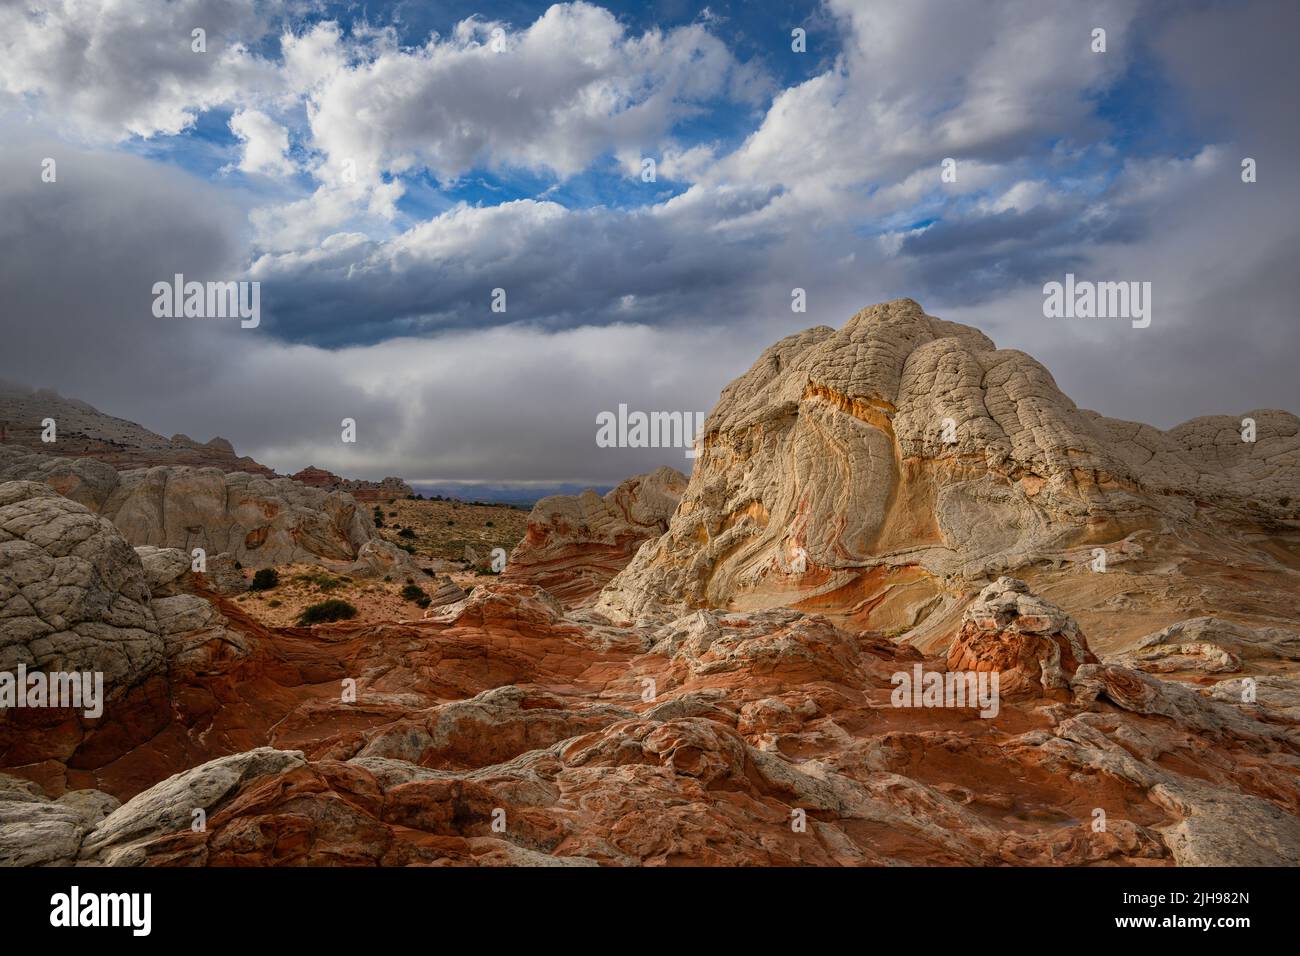 Sandstone rock formations at White Pocket in Vermillion Cliffs National Monument, Arizona. Stock Photo